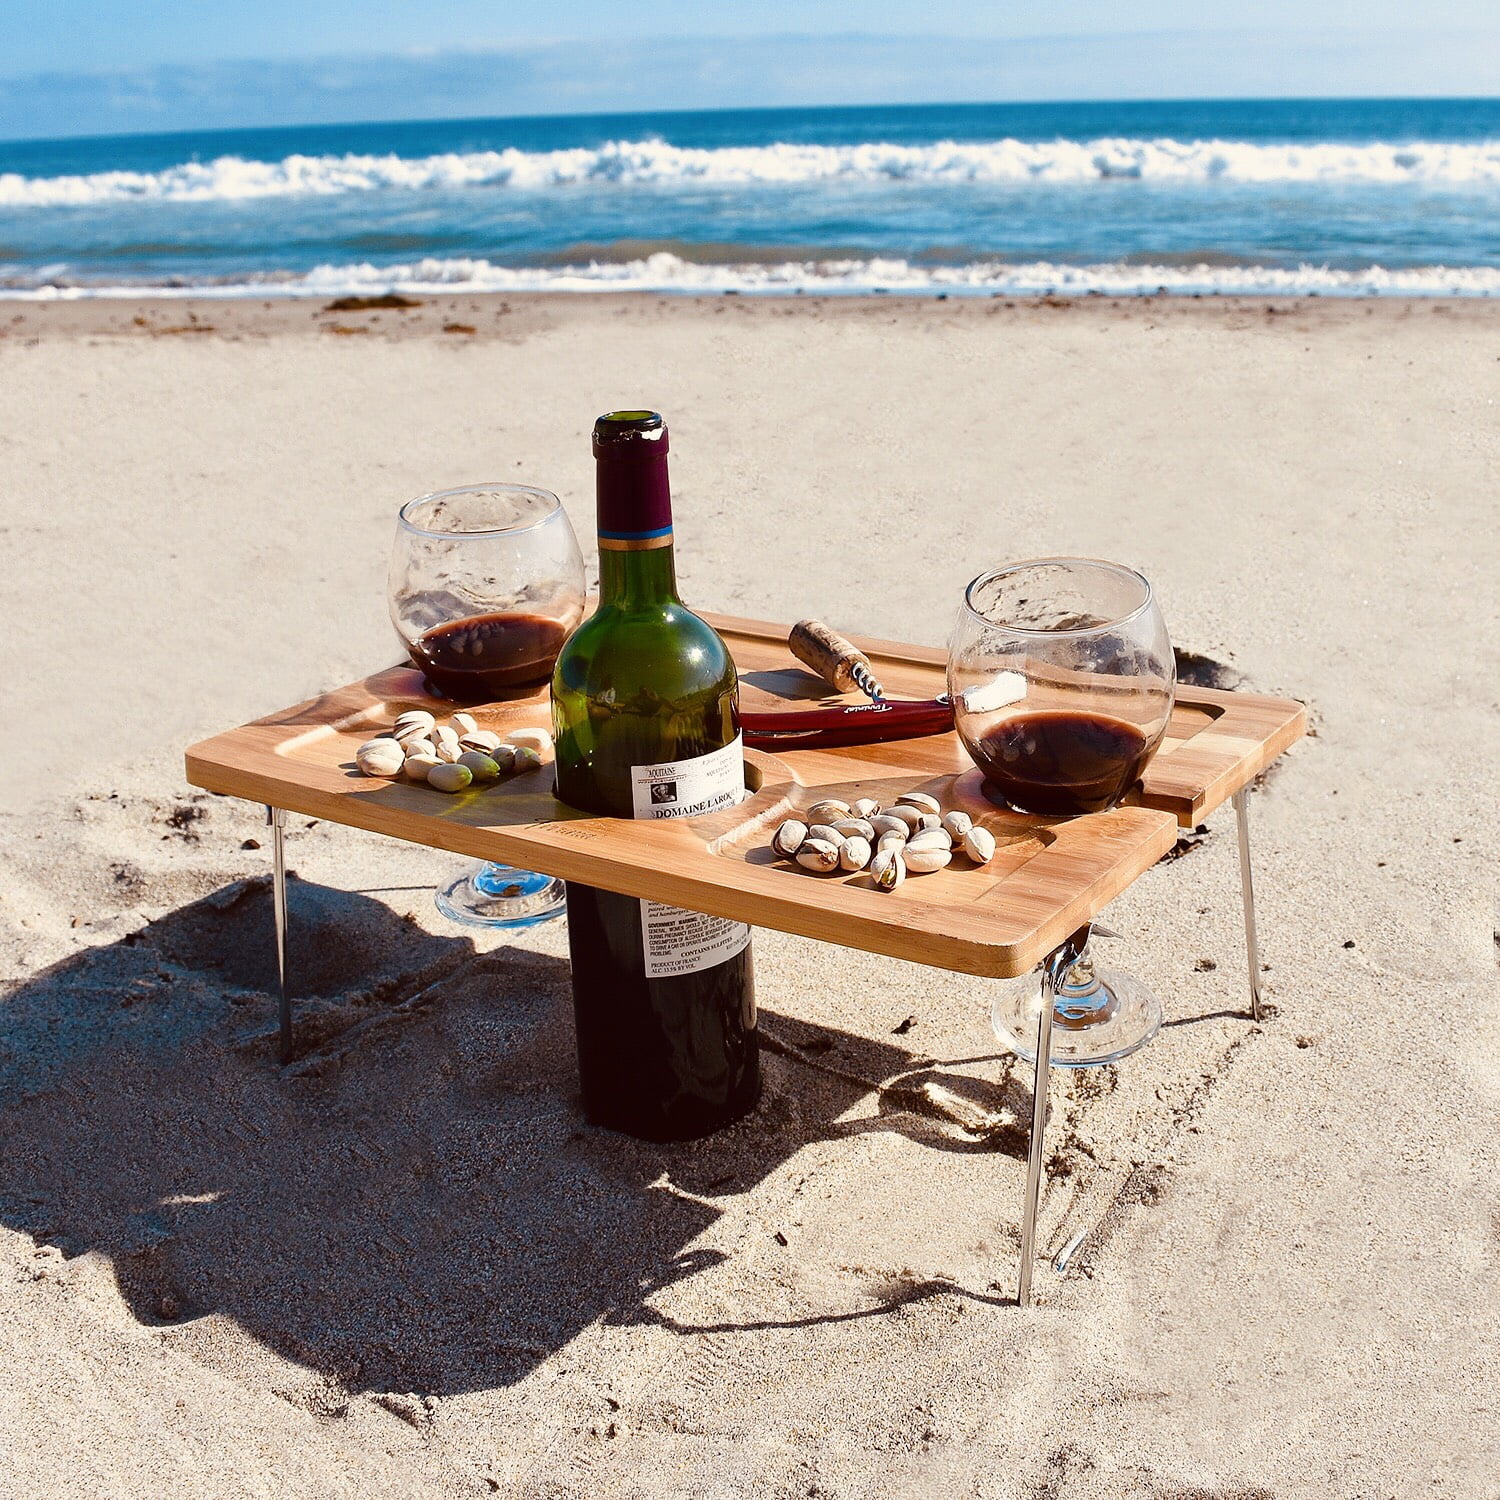 Wooden Outdoor Folding Picnic Basket Table,wooden folding picnic Table With 2-in-1 Wine Cup Holder,Folding Portable Picnic Table Arrangement Soild Wood Wine Glass Table for Concerts at Park Brown 